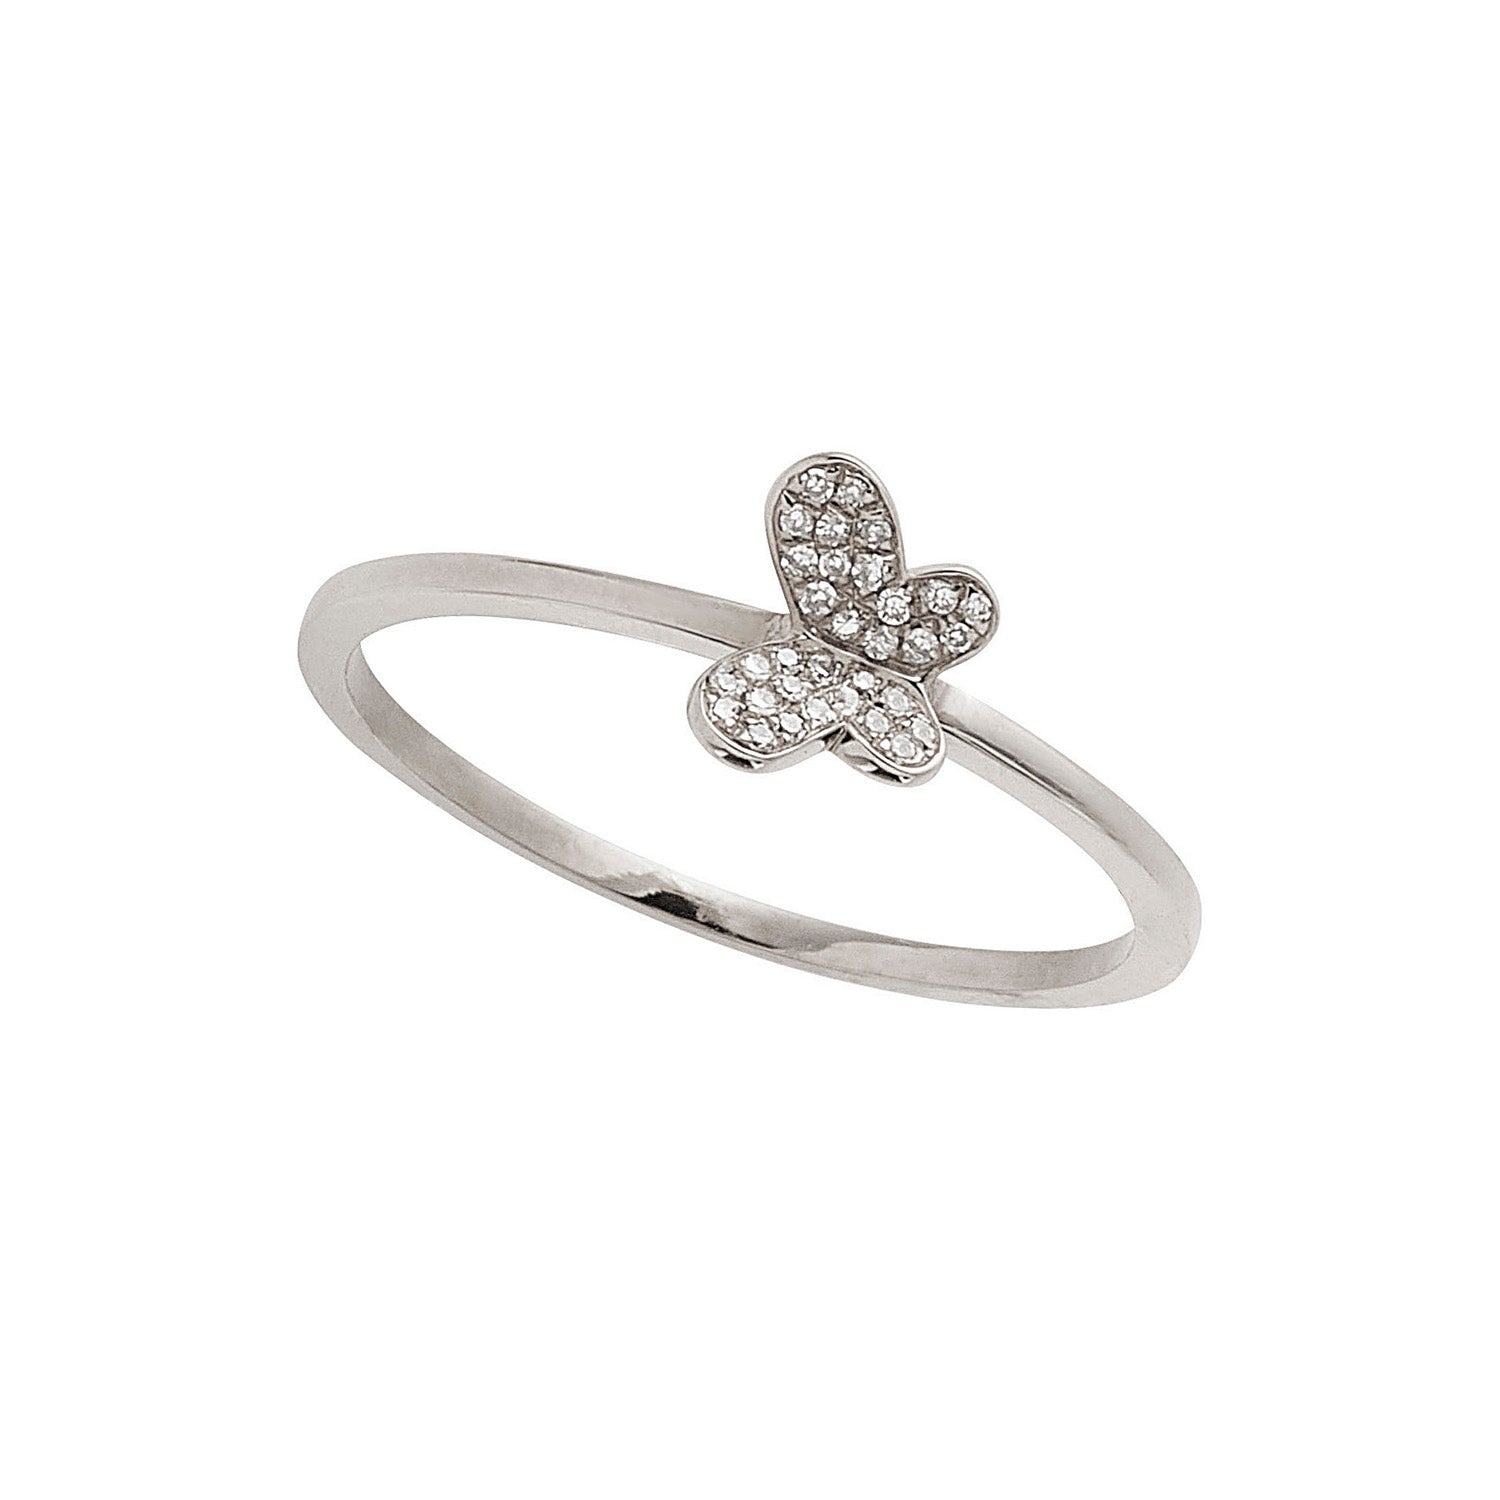 Butterfly gold ring with white diamonds. 